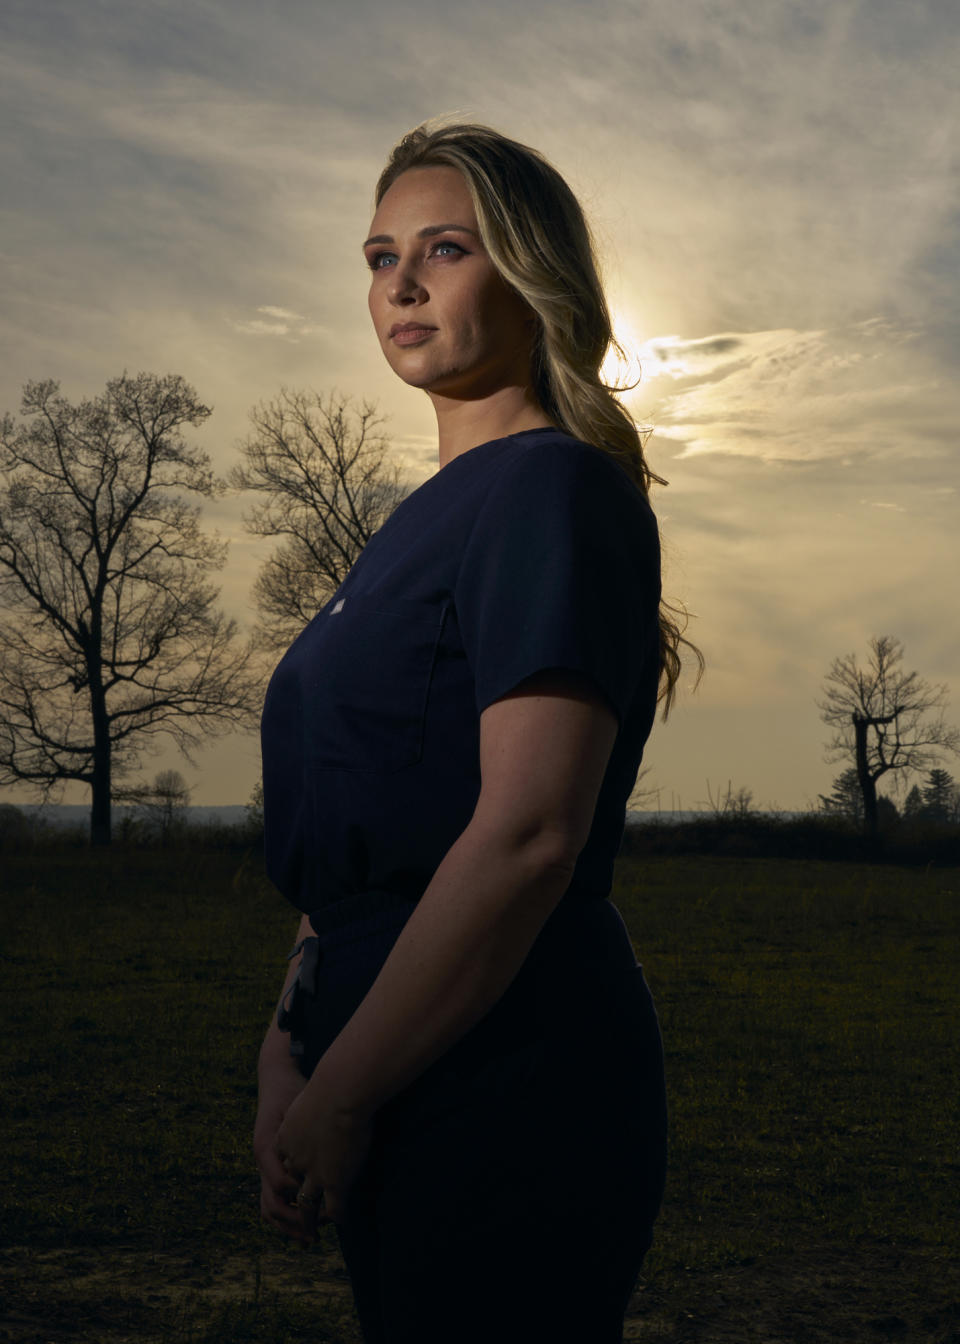 Image: Tiffany Dover photographed at her home in Higdon, AL on March 16, 2023. (Stacy Kranitz for NBC News)